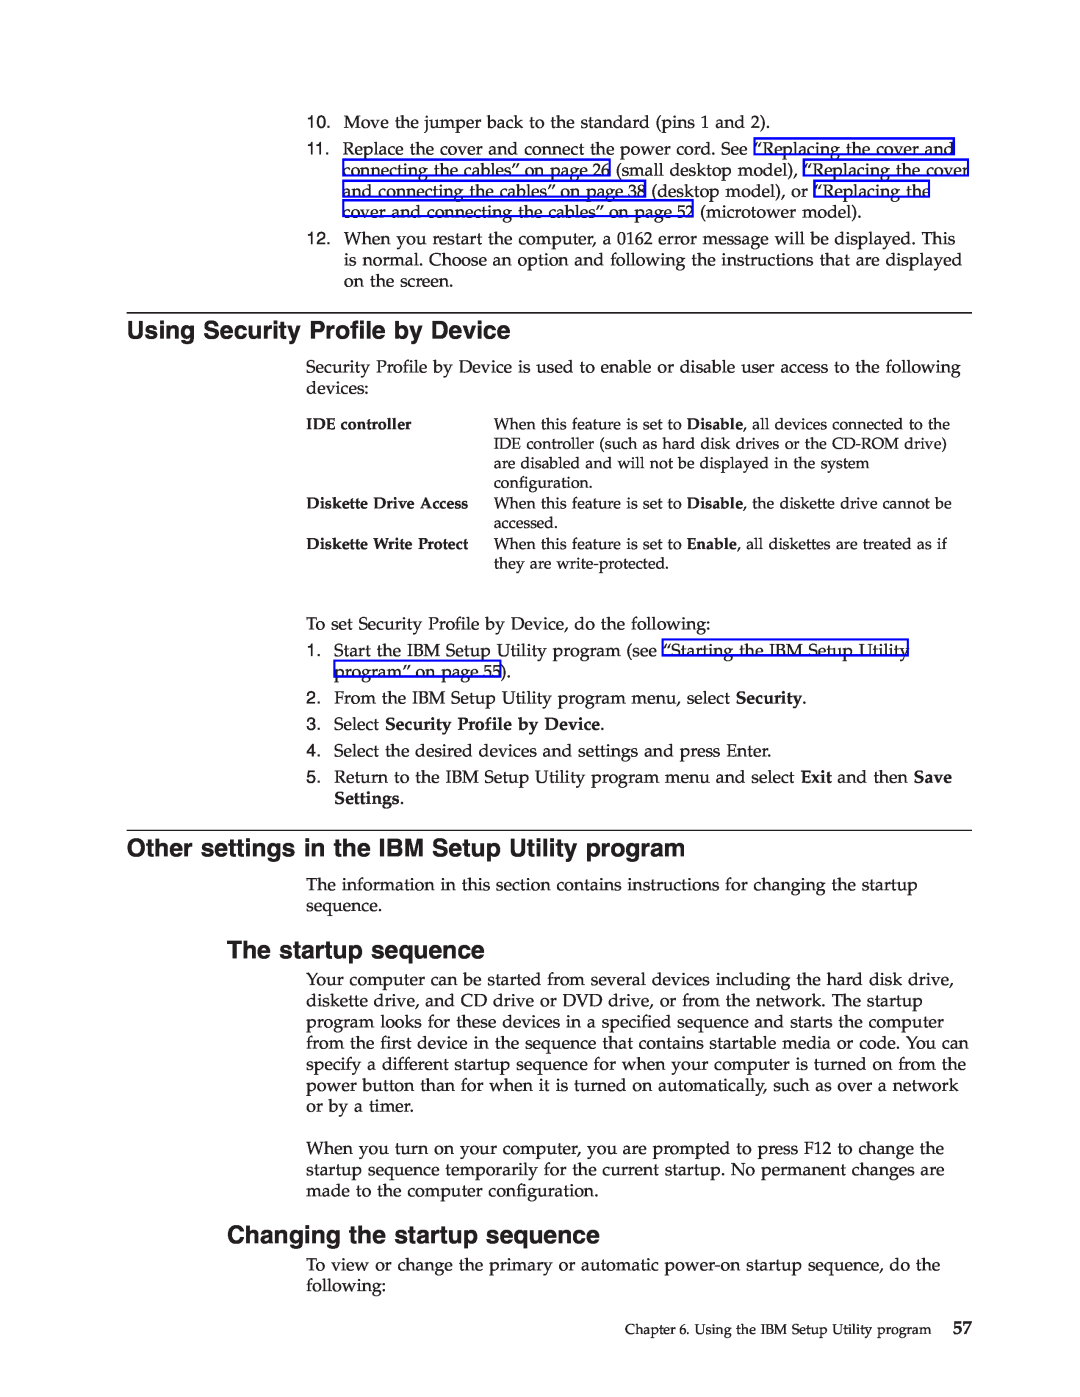 IBM Partner Pavilion 2292, 6343, 6793 Using Security Profile by Device, Other settings in the IBM Setup Utility program 